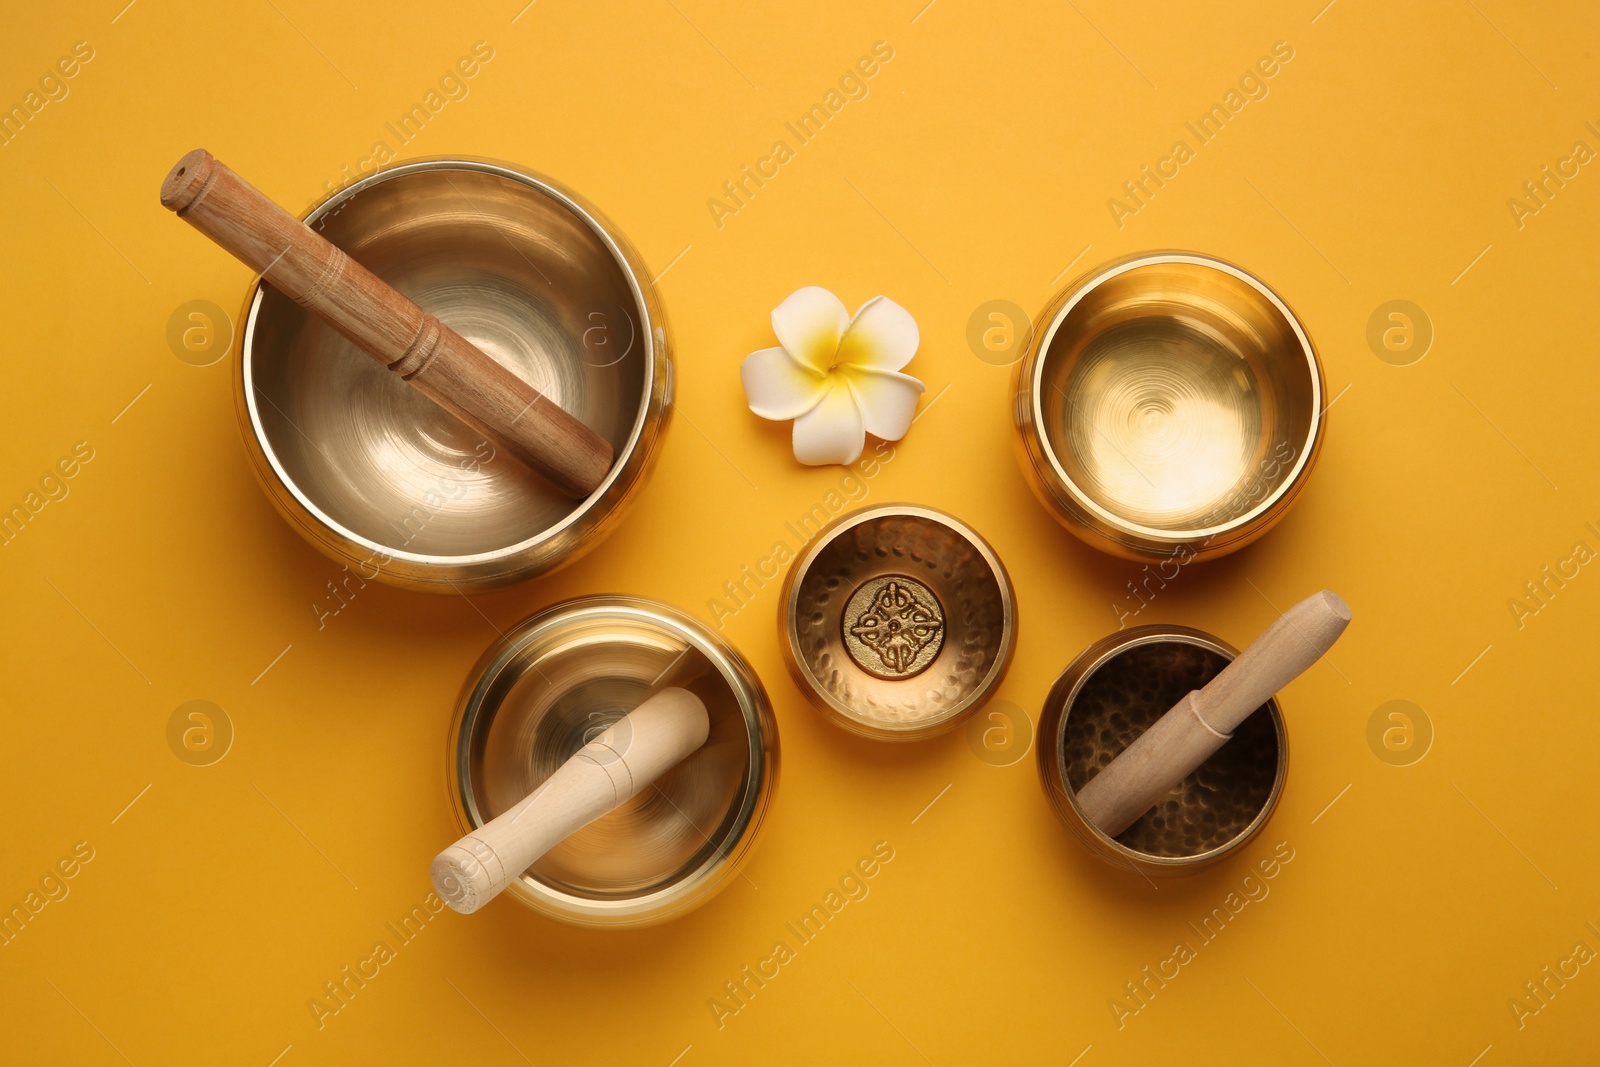 Photo of Golden singing bowls, mallets and flower on orange background, flat lay